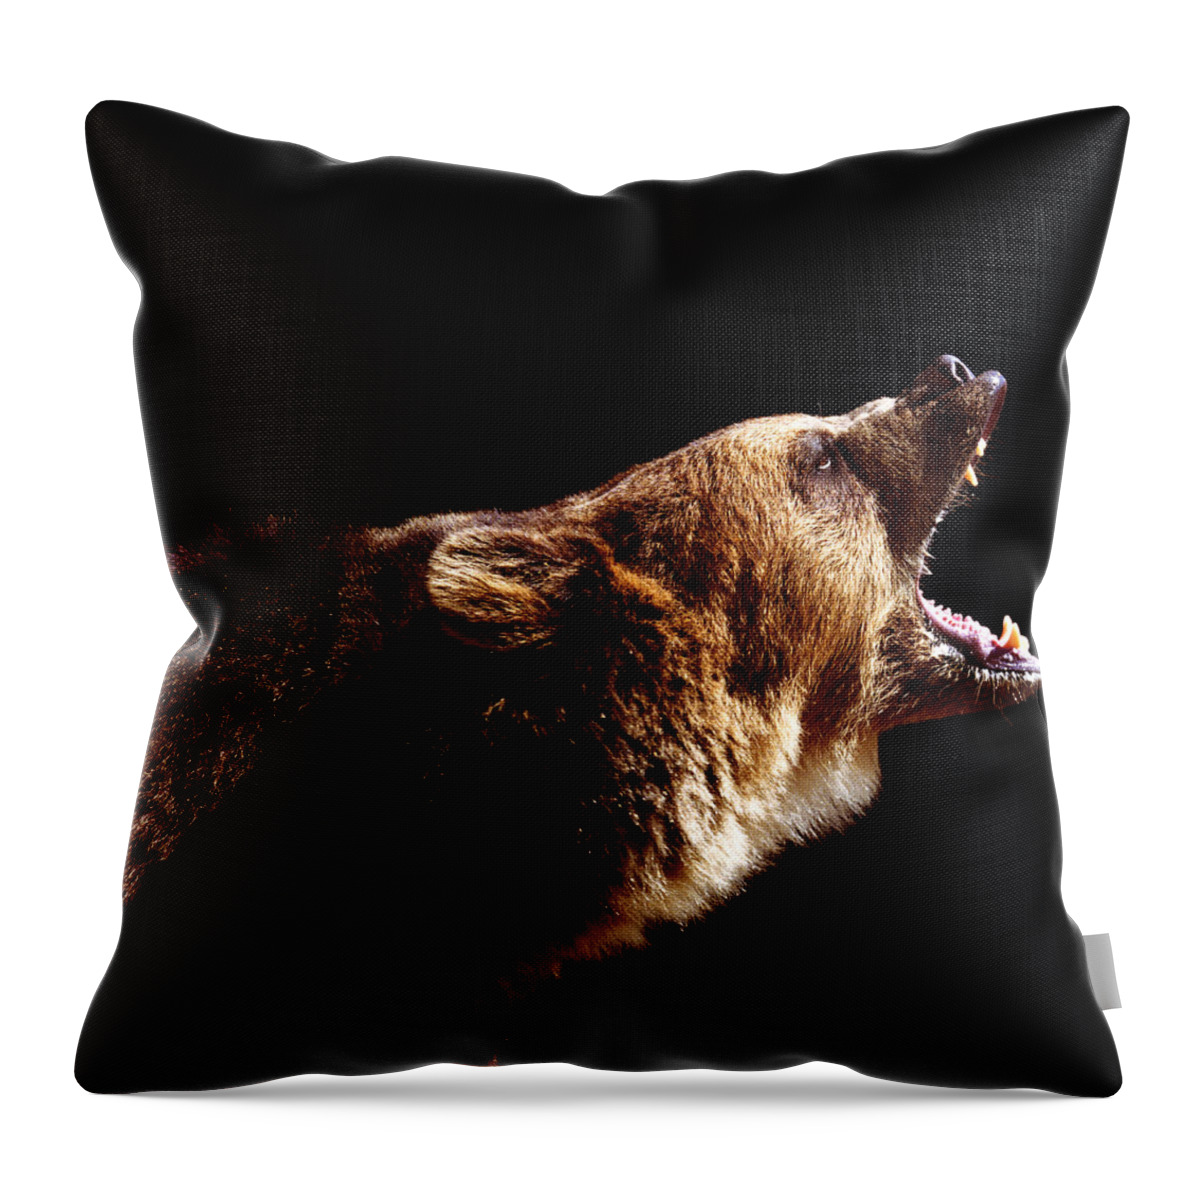 Brown Bear Throw Pillow featuring the photograph Brown Bear Ursus Arctos Roaring, Side by Ryan Mcvay